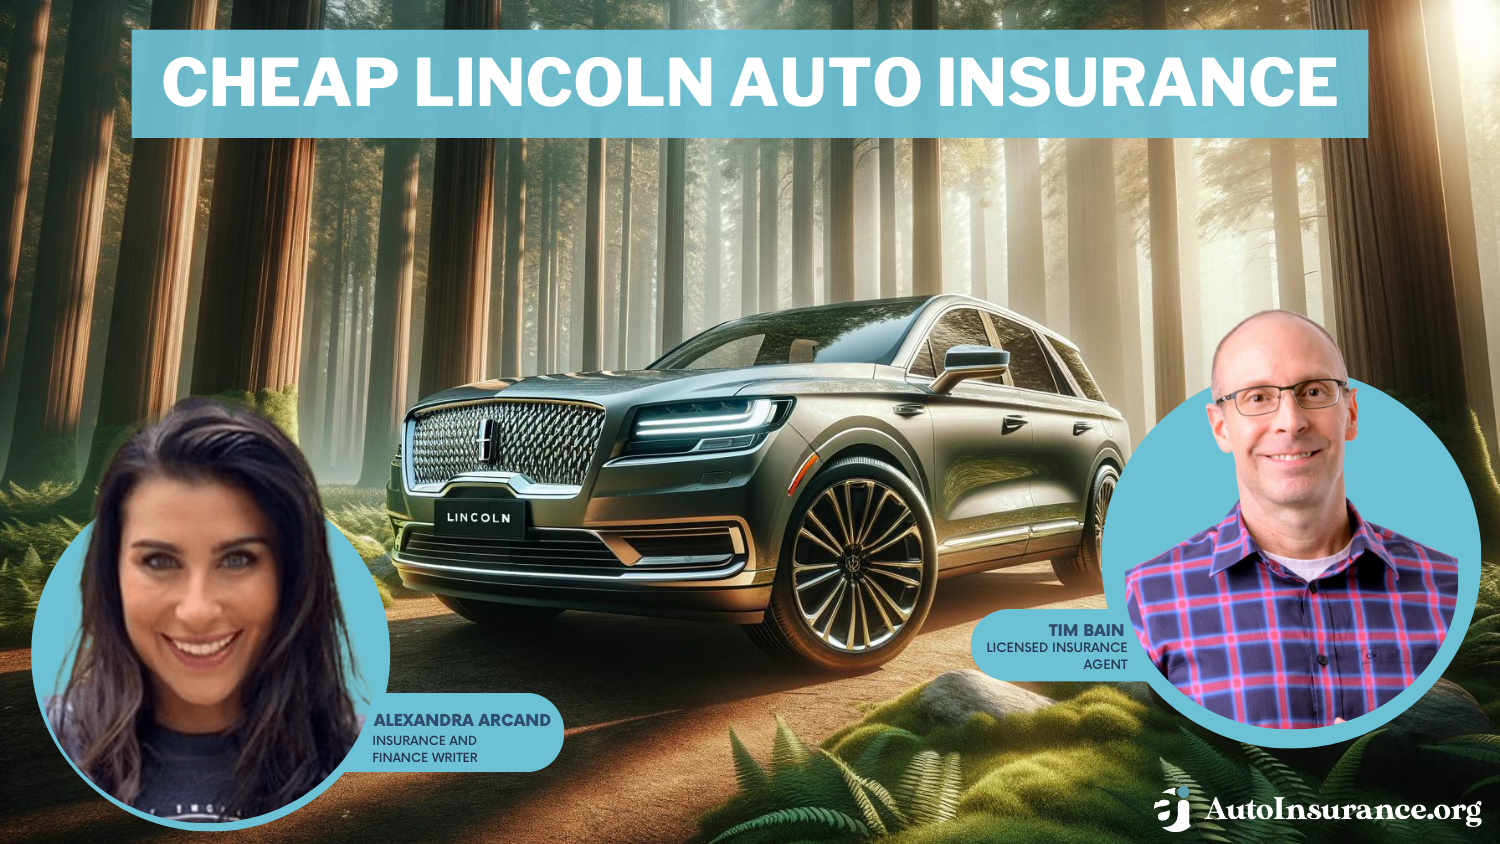 Cheap Lincoln Auto Insurance - AAA, State Farm, Travelers